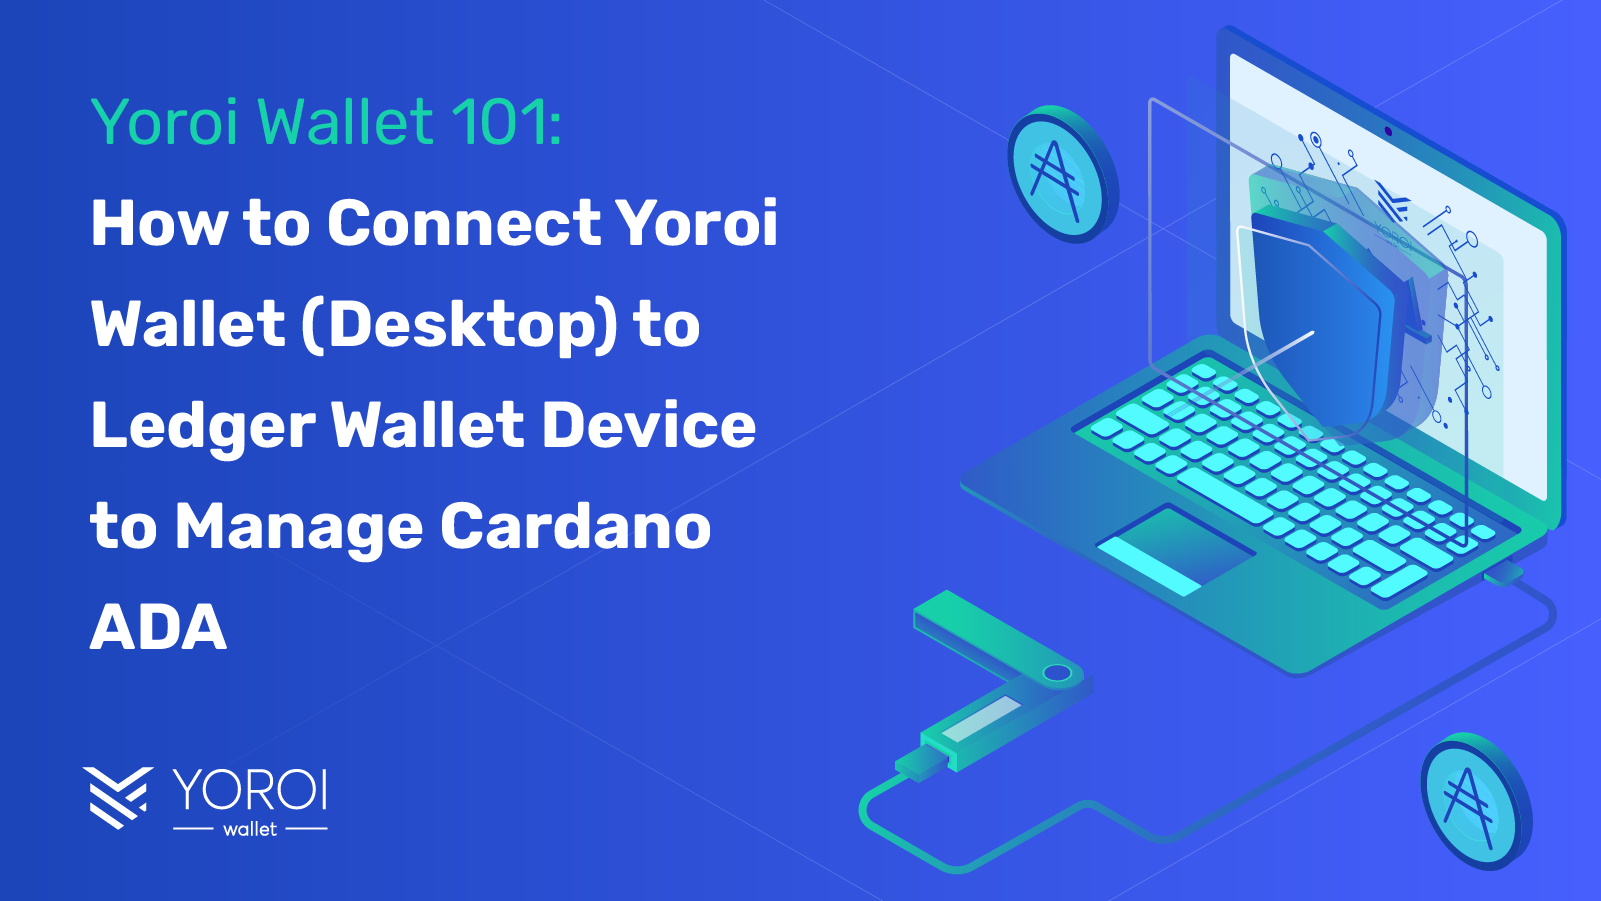 Yoroi-Wallet-How-to-Connect-to-Ledger-Wallet-Cardano-ADA.png